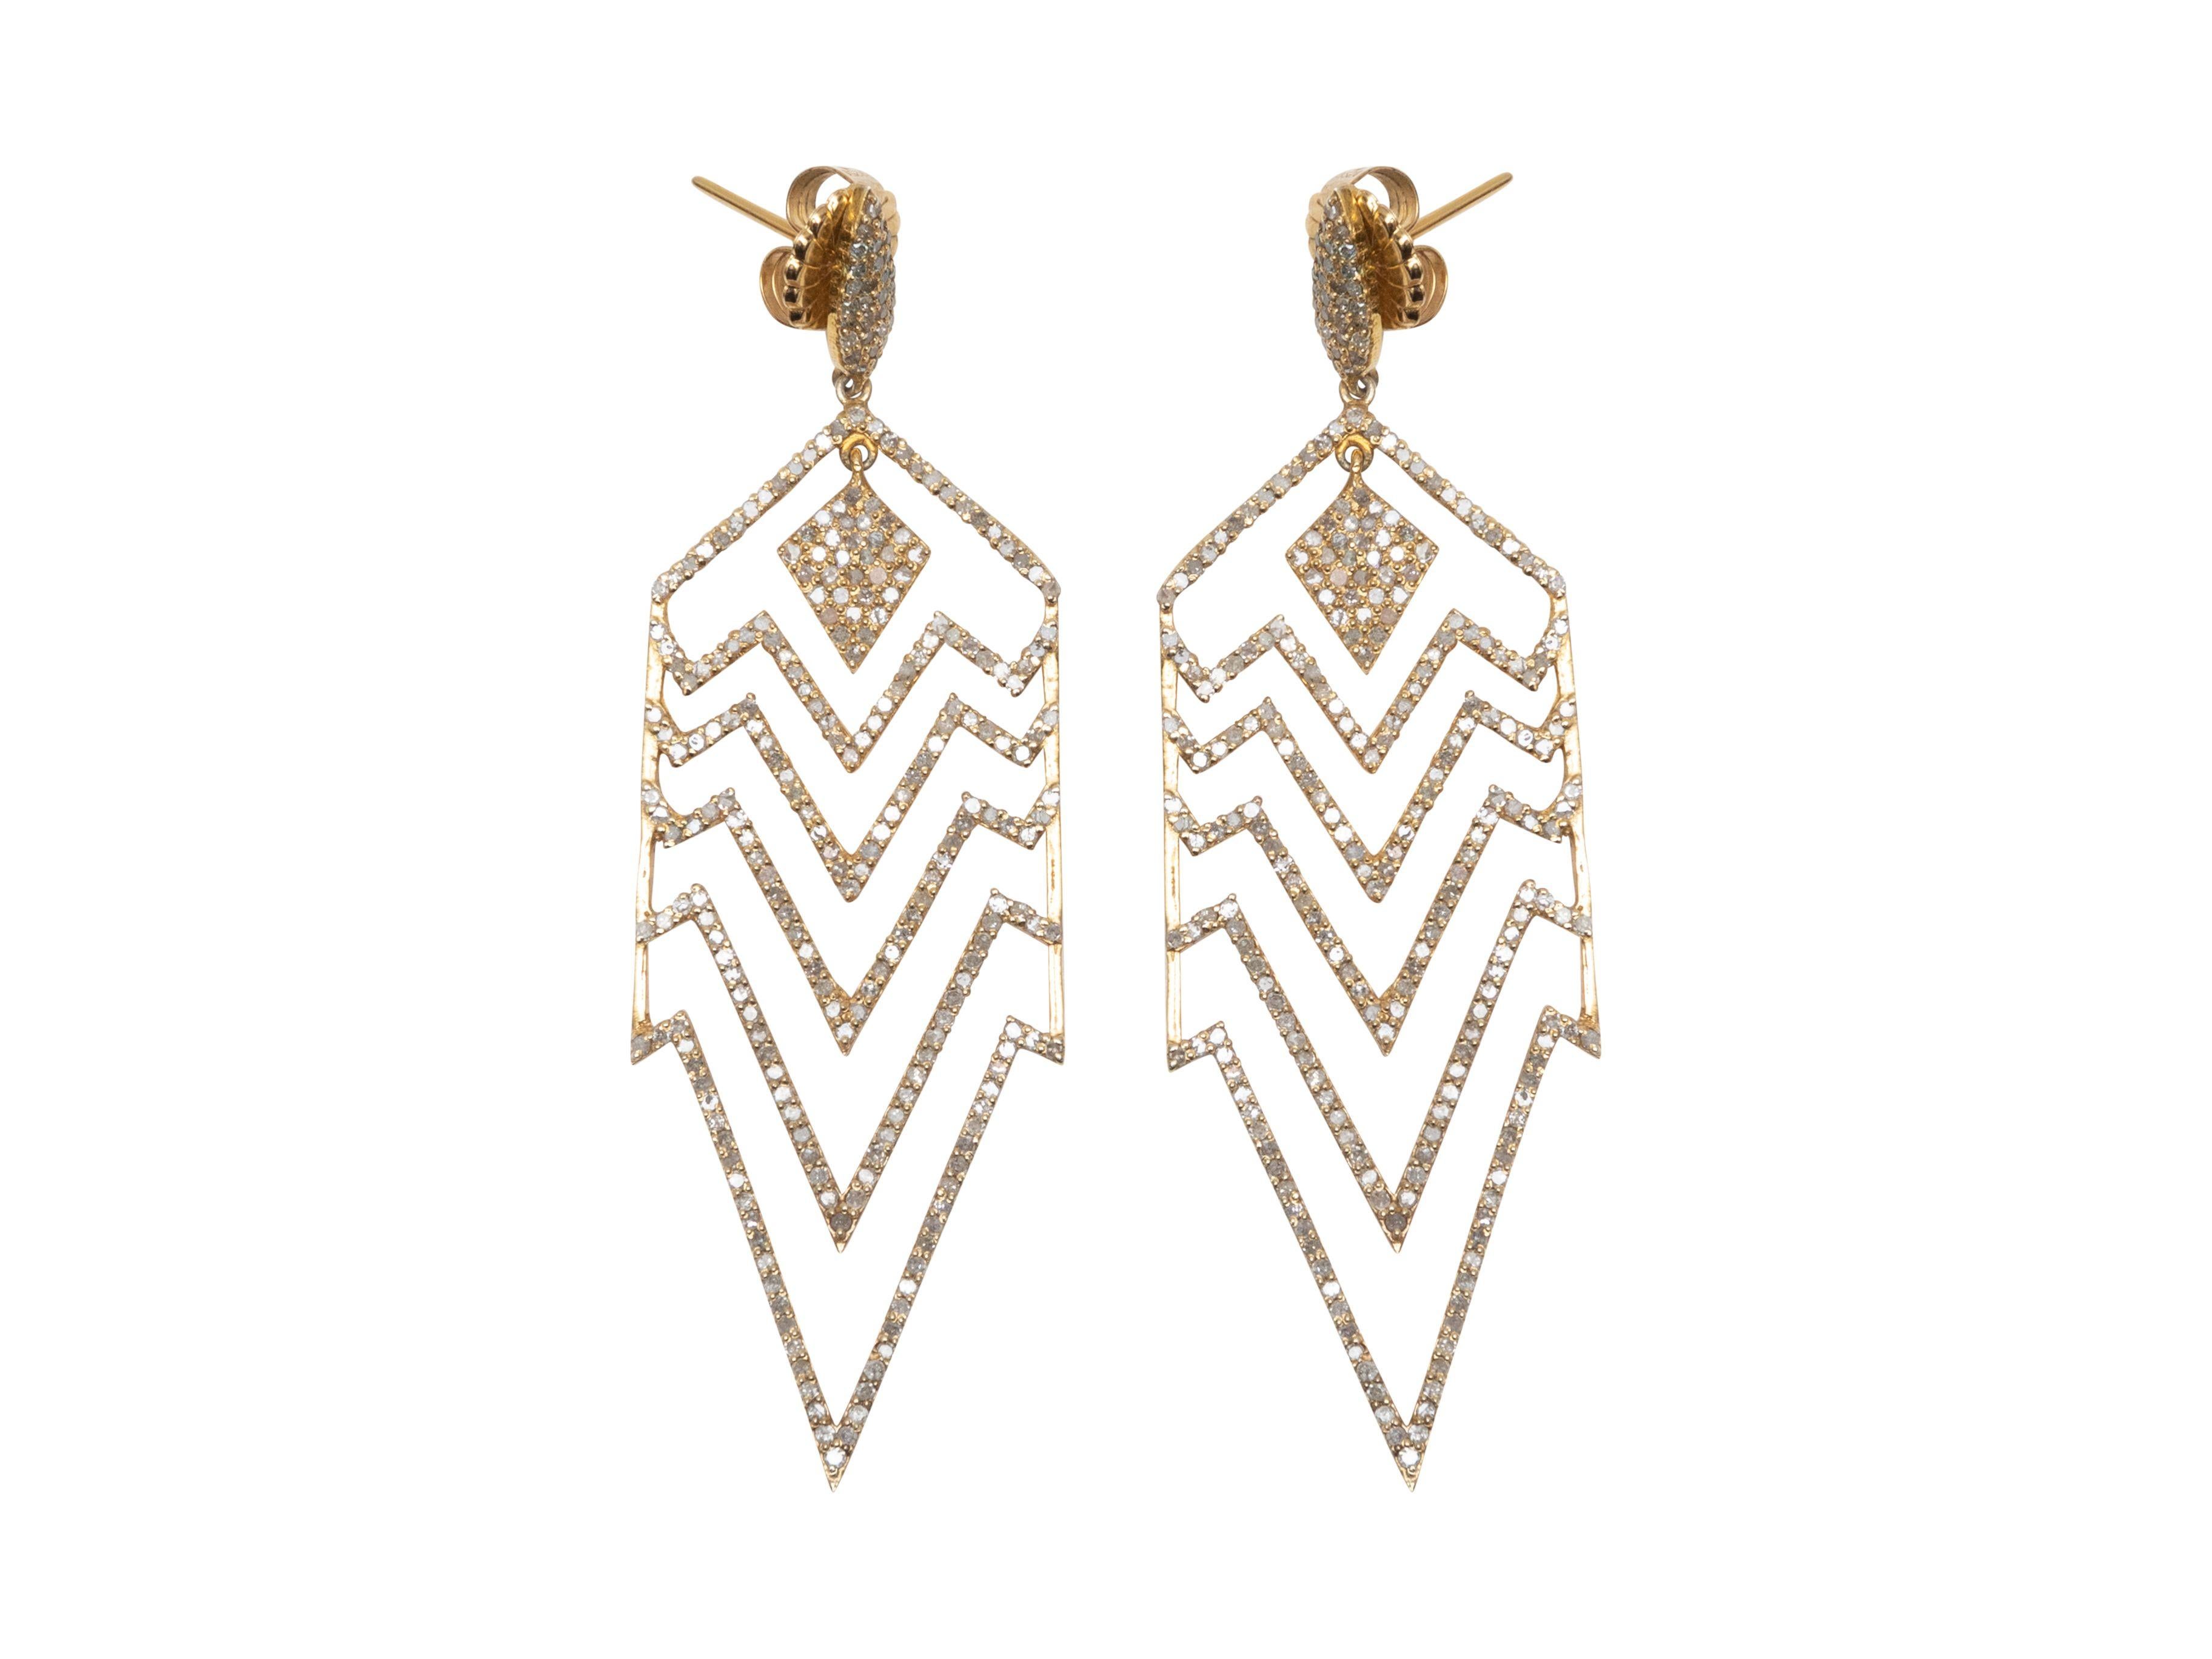 Product Details: Yellow gold and pave diamond chevron drop earrings by Jennifer Miller. Butterfly back closures. 3